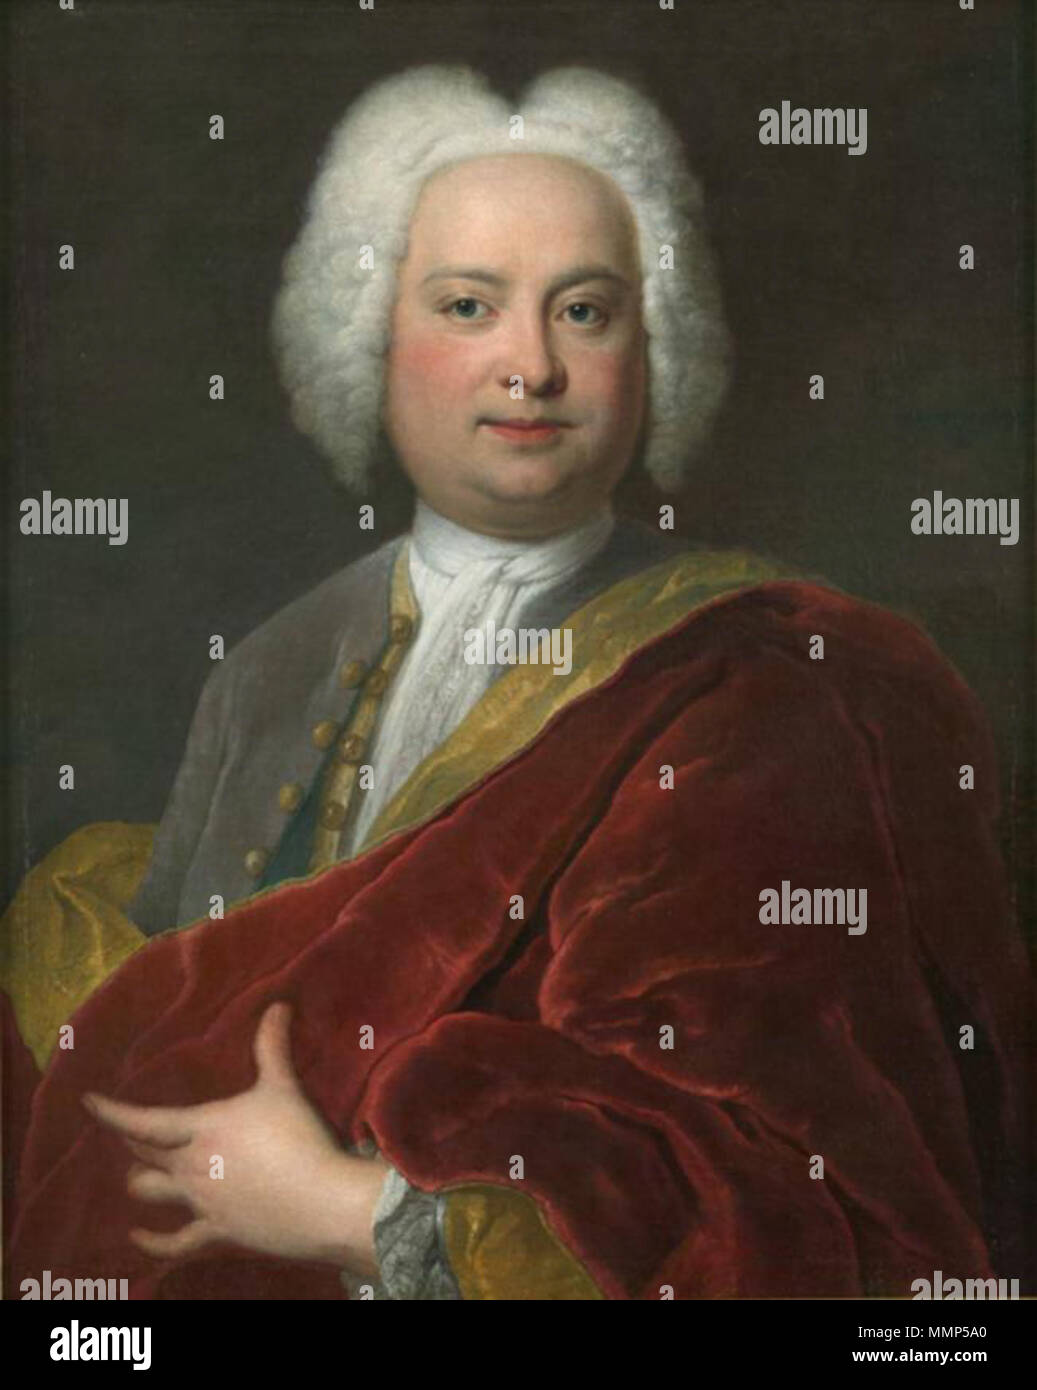 English: Portrait of William Anne Keppel, 2nd Earl of Albemarle . circa 1745. William Anne Keppel, 2nd Earl of Albemarle, by Charles Philips Stock Photo